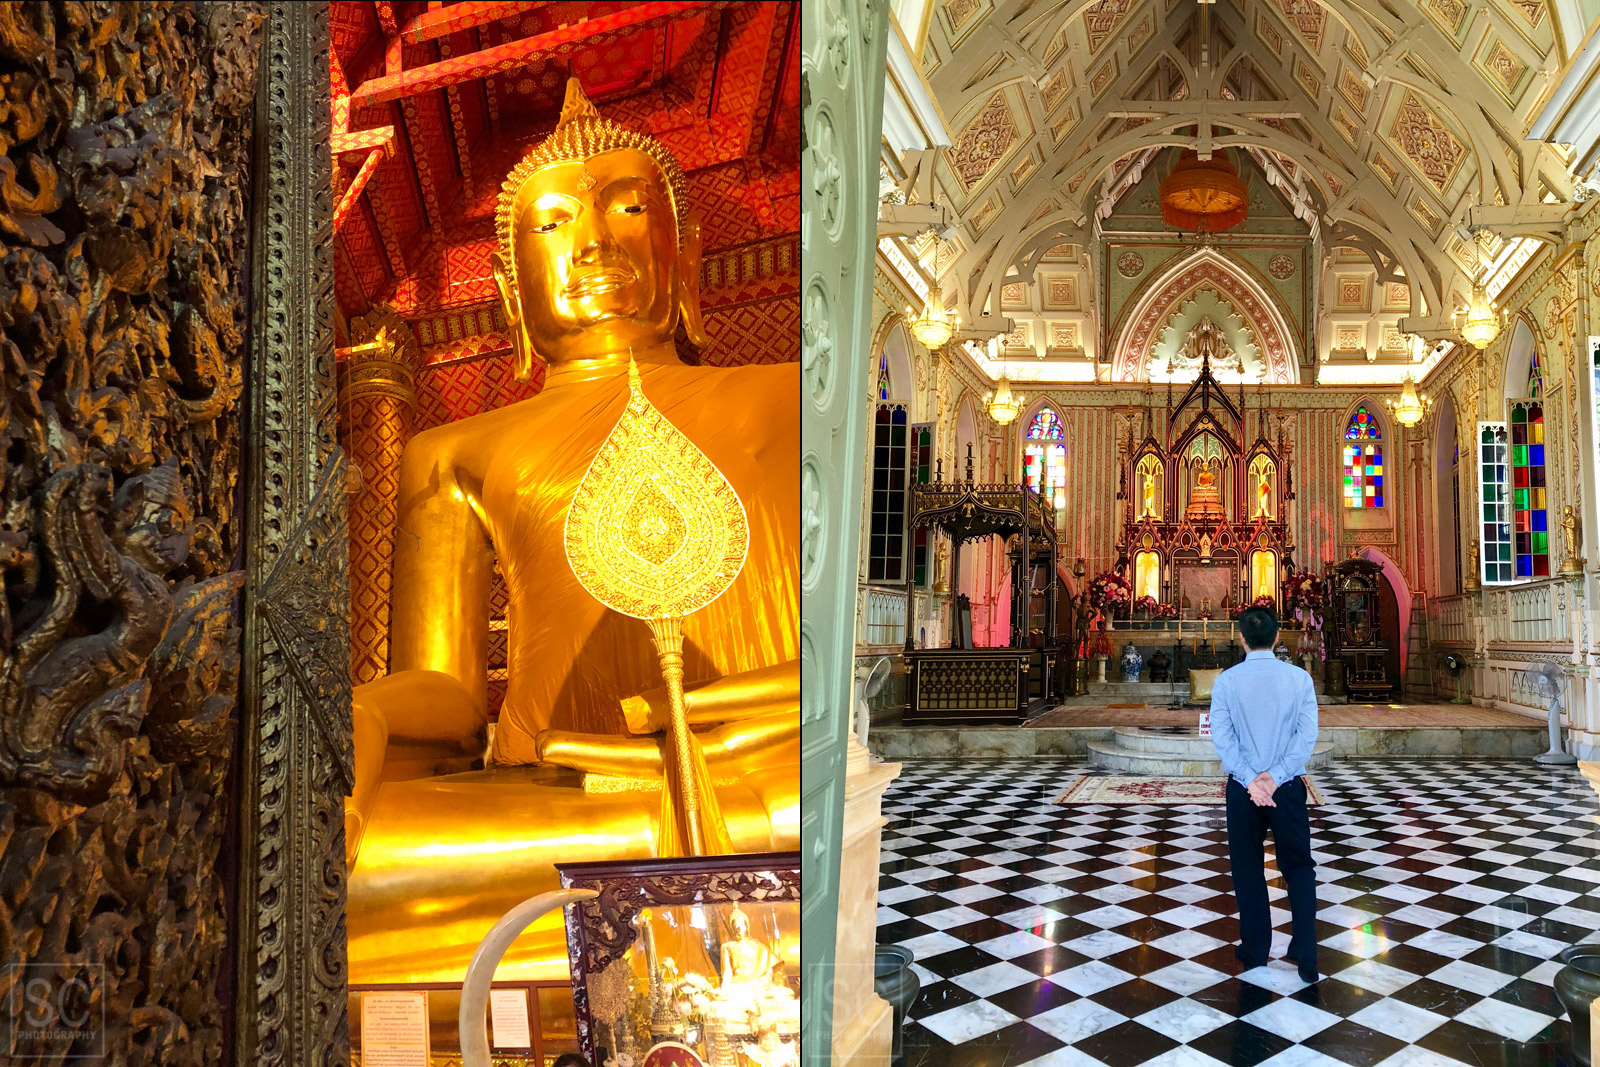 These are both Buddhist temples: traditional style Wat Phanan Choeng (left) and European Gothic style Wat Niwet Thammaprawat (right)